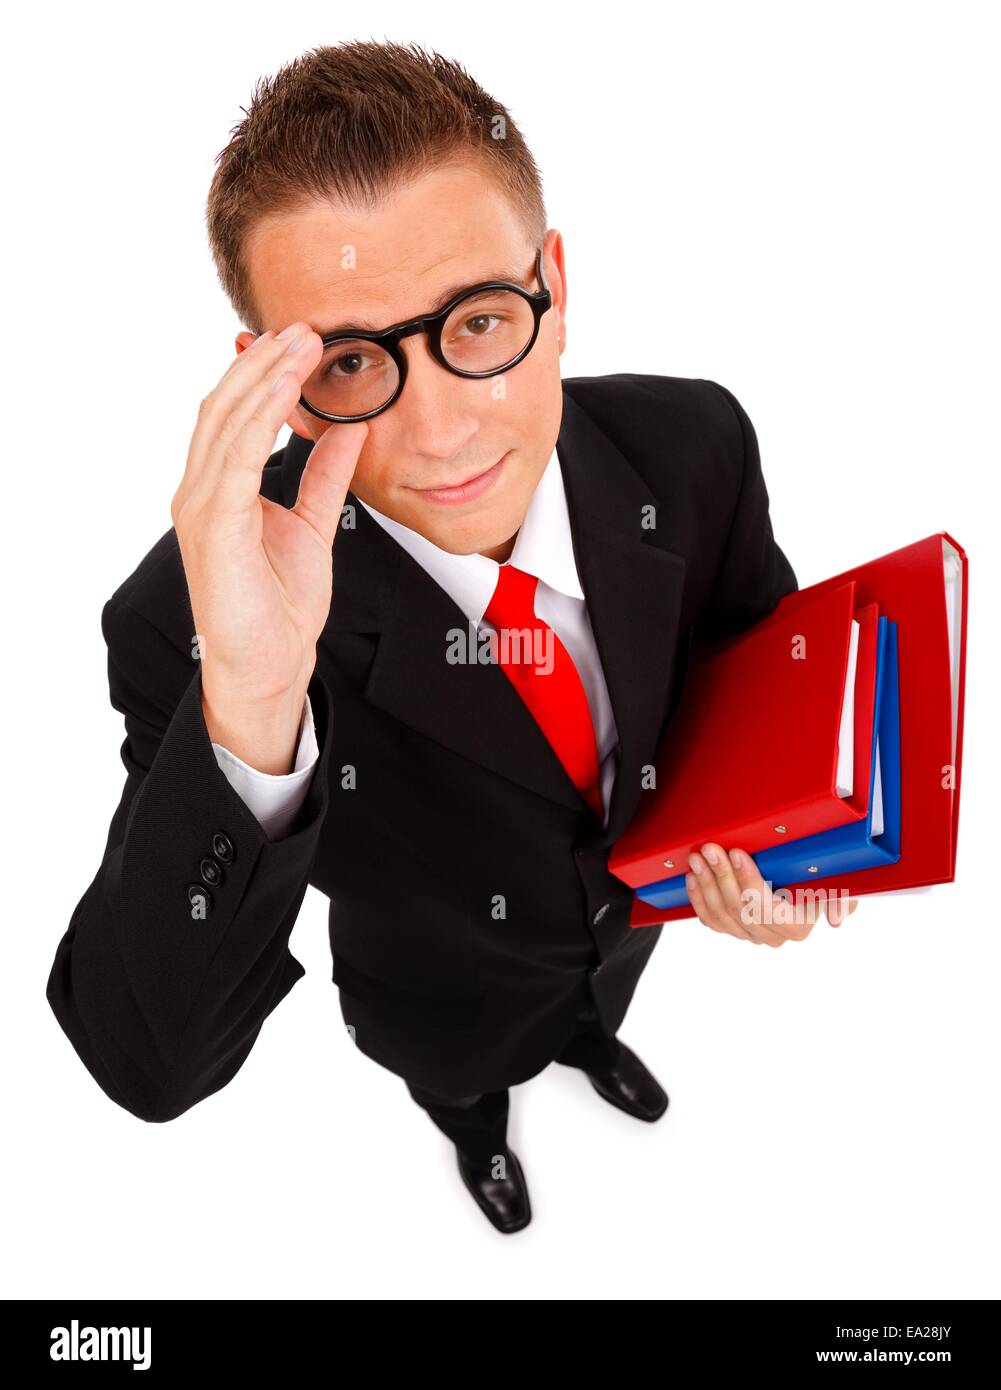 Top view of a young business man, student or teacher with folders in hand, wearing glasses Stock Photo